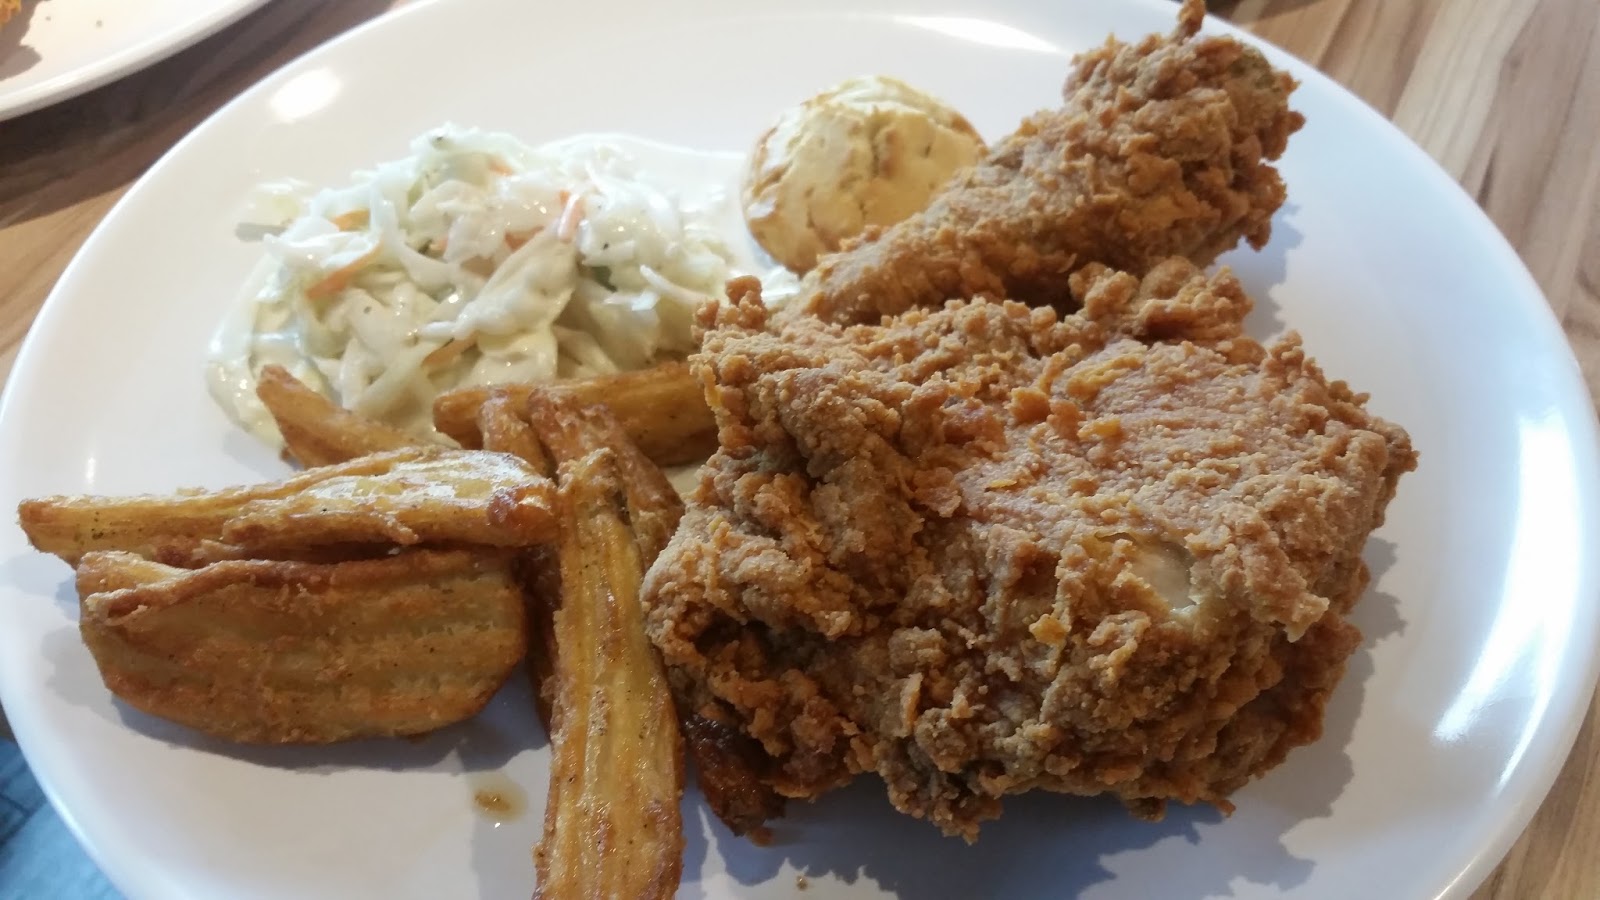 Food Review: Chic-a-Boo Fried Chicken - JtheJon